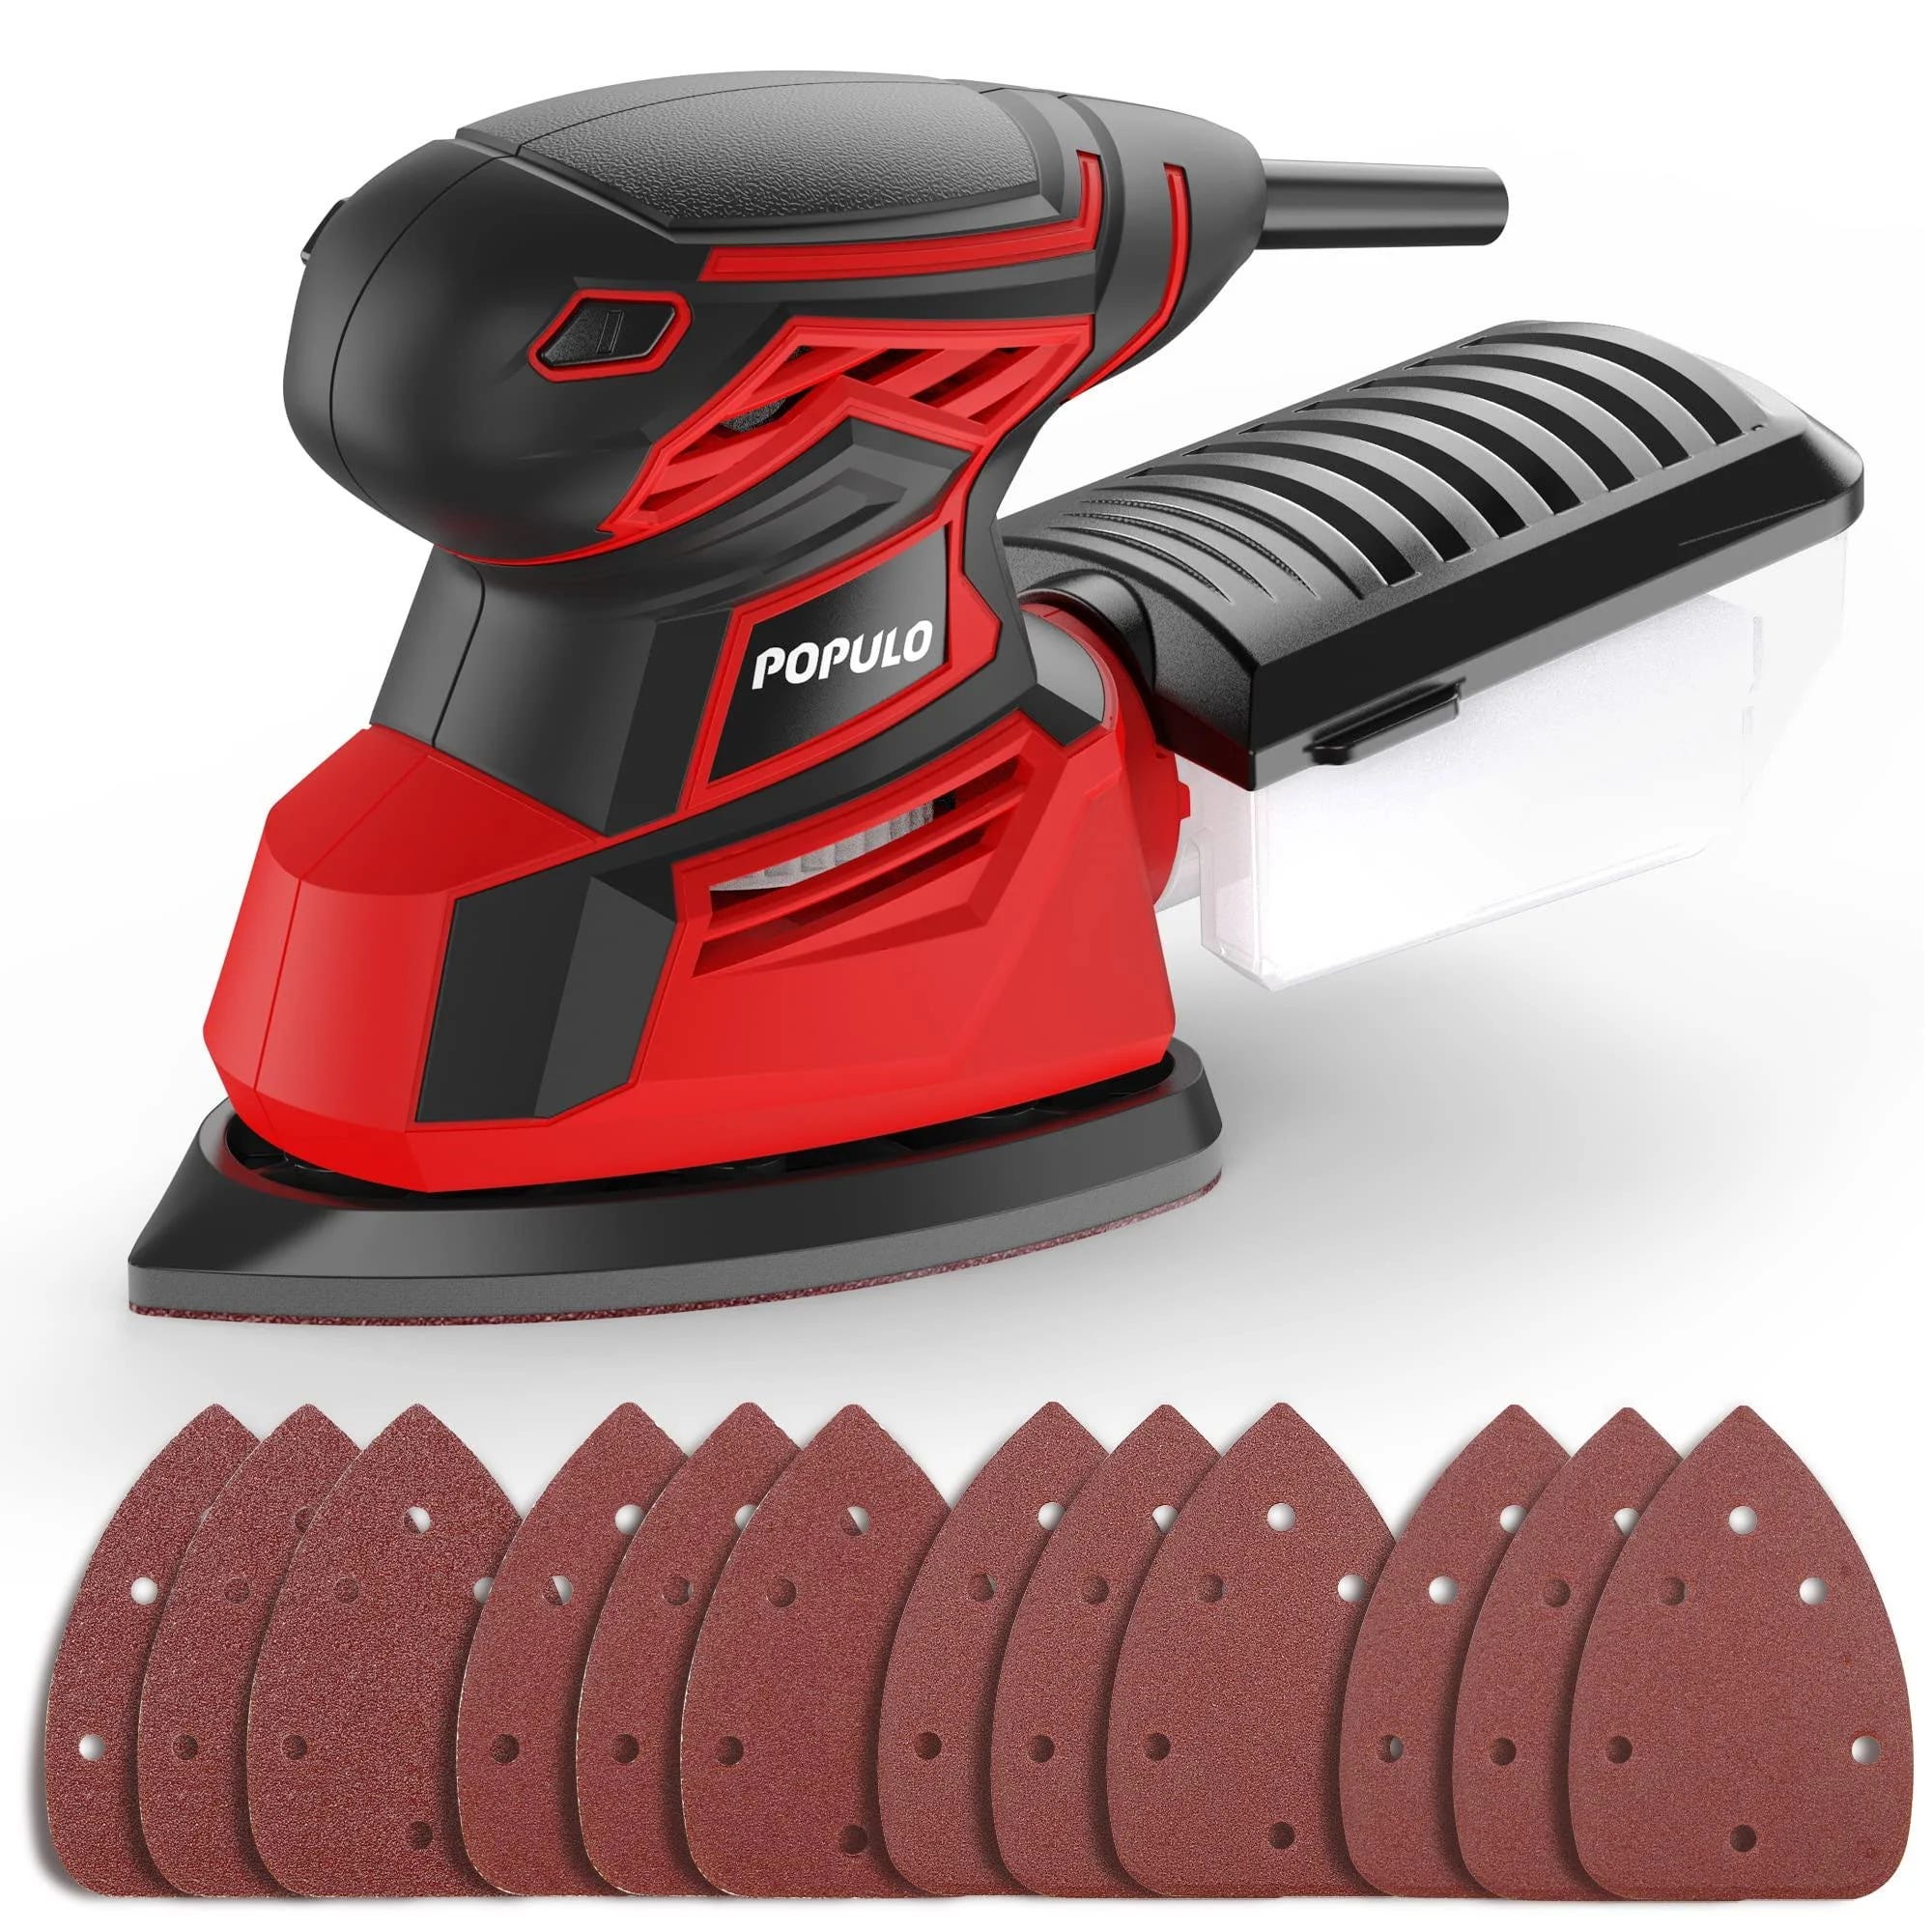 POPULO High-Powered Electric Palm Sander for Smooth Woodworking | Image